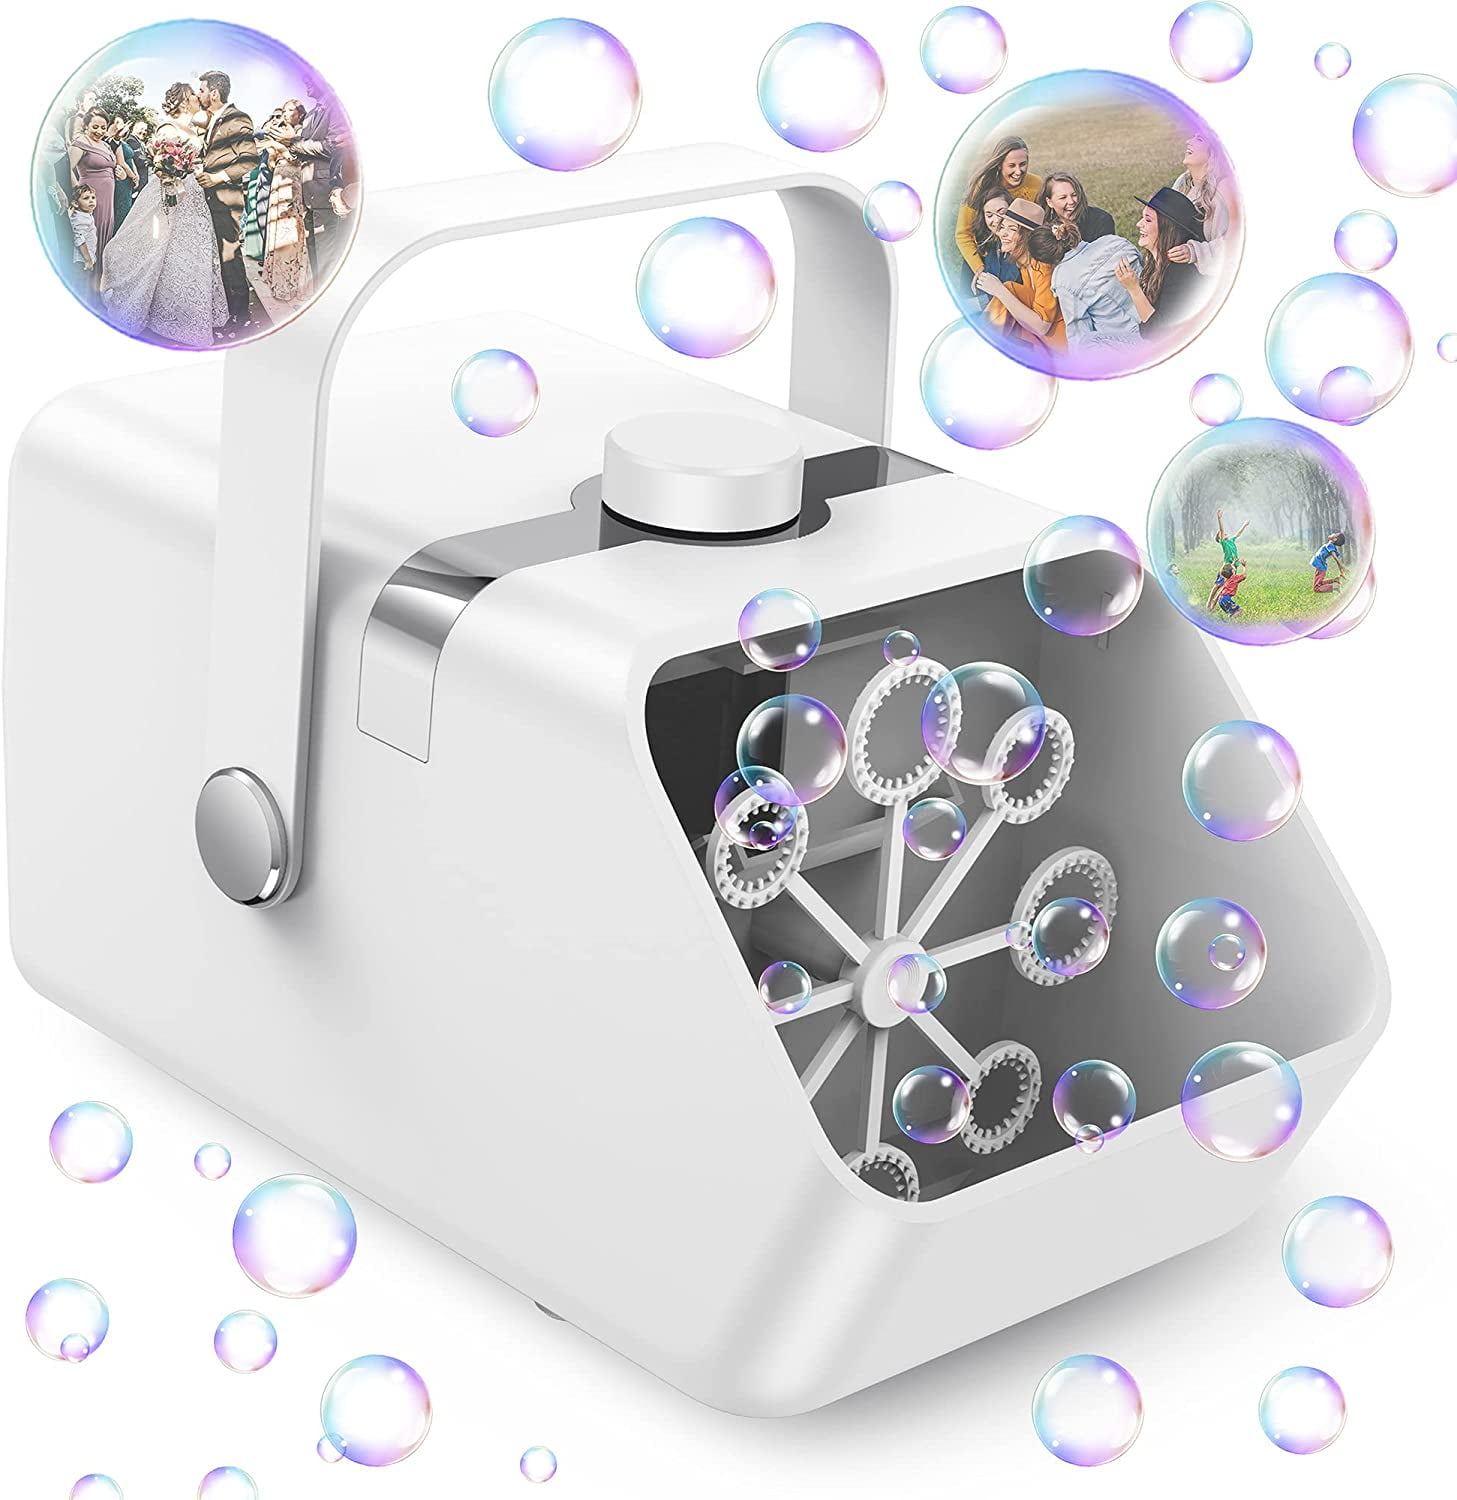 Overtreden Ontleden hun Bubble Machine,Automatic Bubble Blower Portable Bubble Maker for Kids with  2 Speeds,6000+ Bubbles Per Minute,Plug-in or Batteries Bubbles Toy for  Outdoor/Indoor Party Birthday (White) - Walmart.com